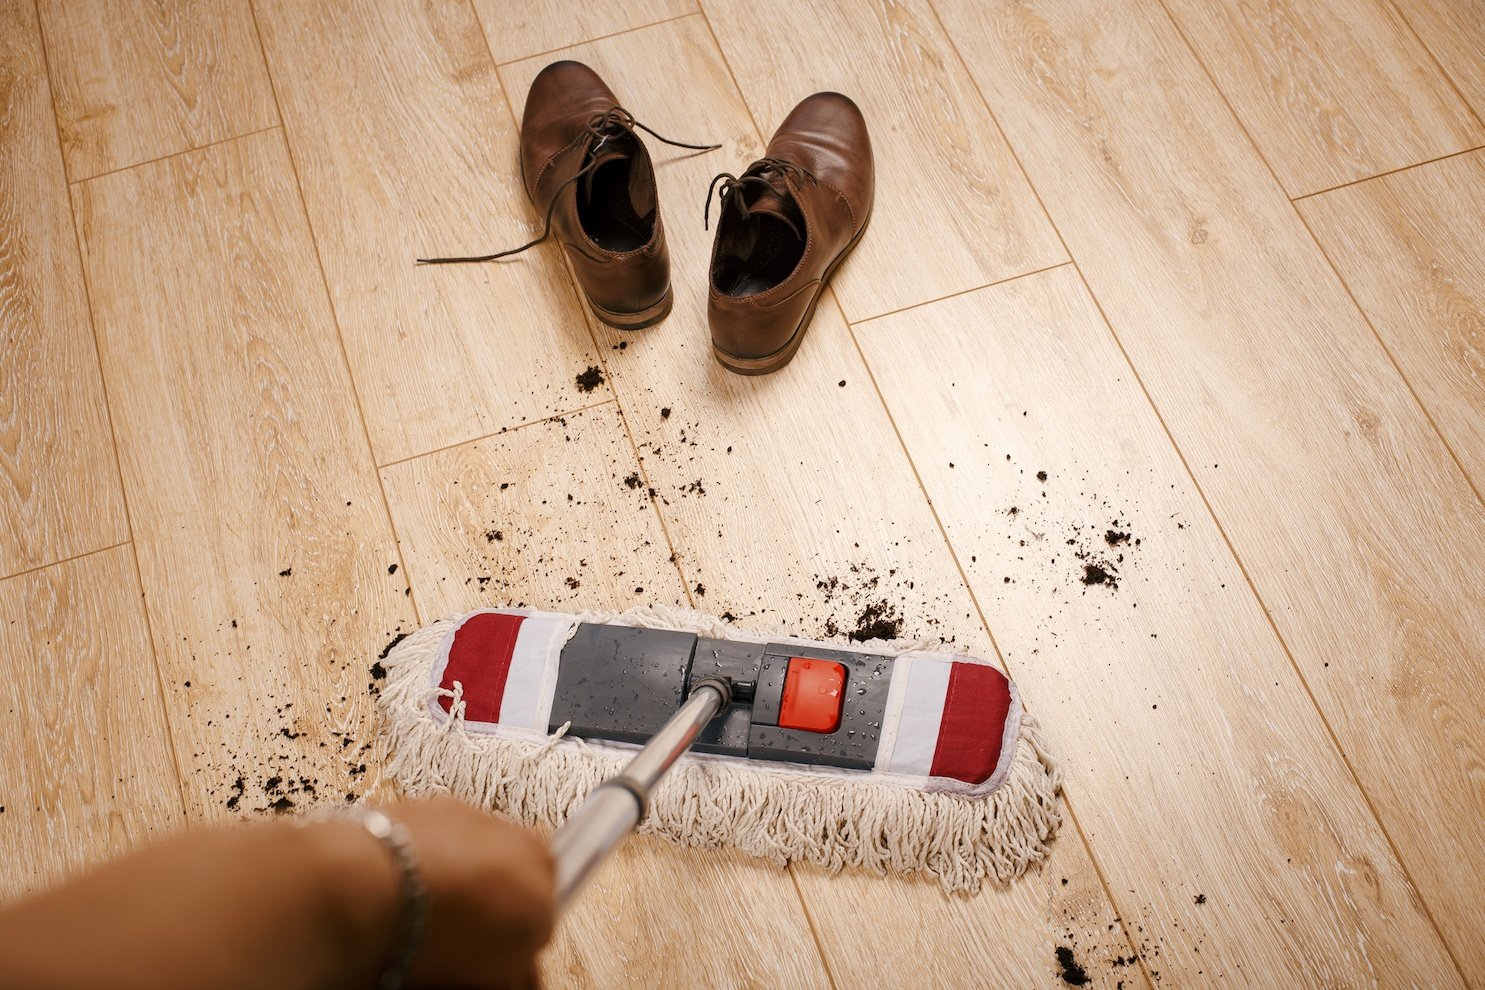 The Most Disgusting Reasons Reason Why You Should Never Wear Your Shoes in the House